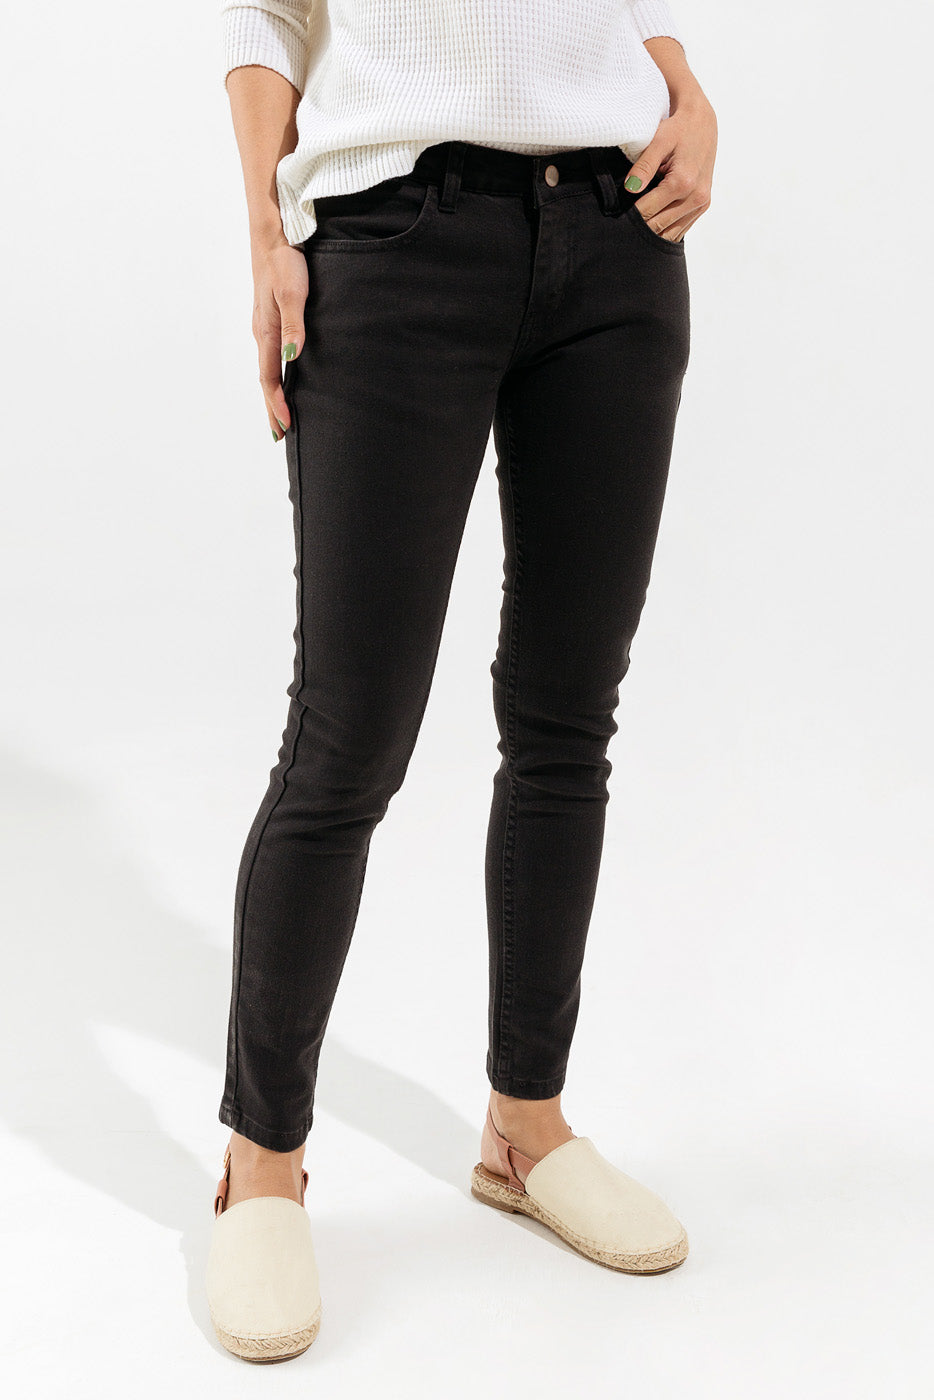 Black Cropped Skinny Jeans - BEECHTREE